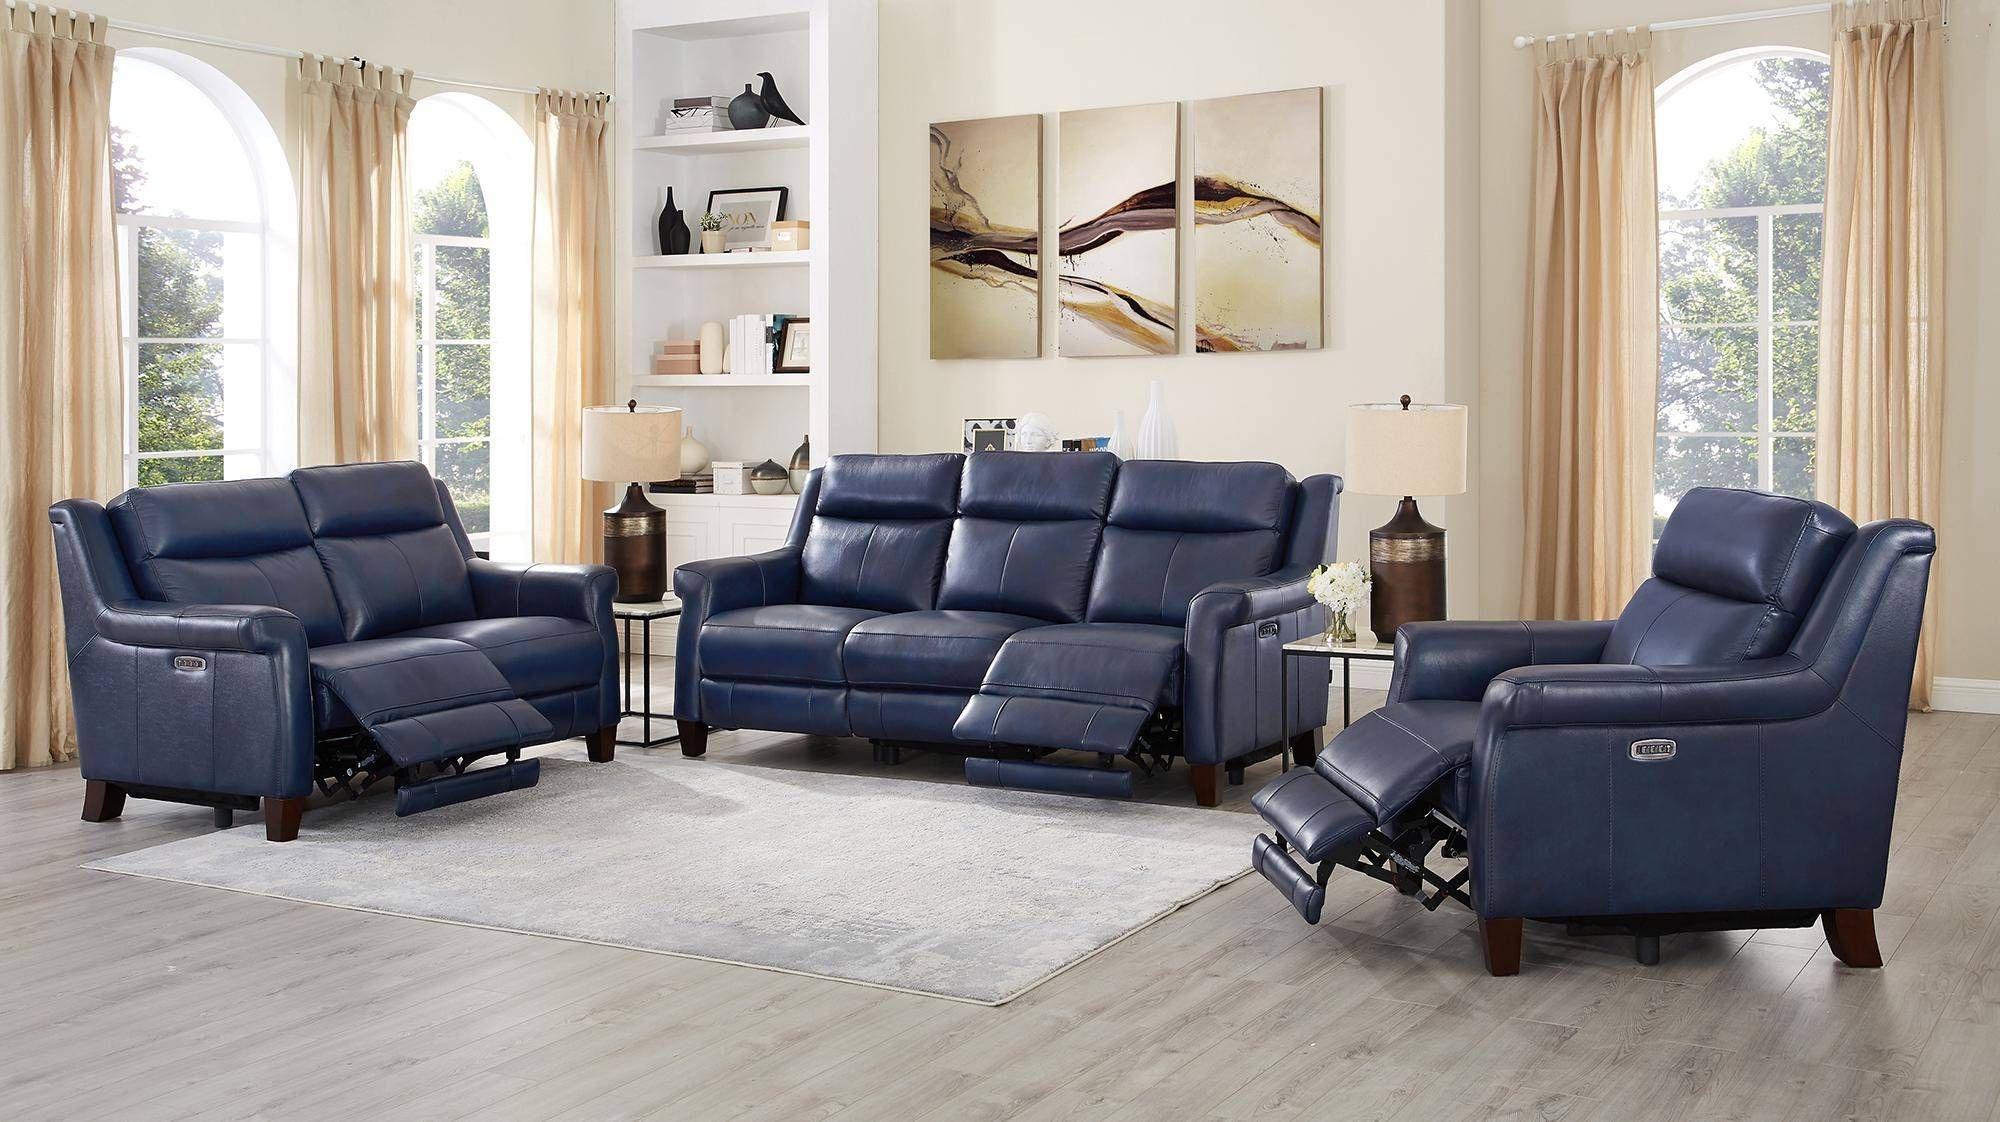 Nolan Leather Power Reclining Sofas Throughout Most Current Chatham Blue Genuine Leather Power Reclining Sofa Navona (View 18 of 20)